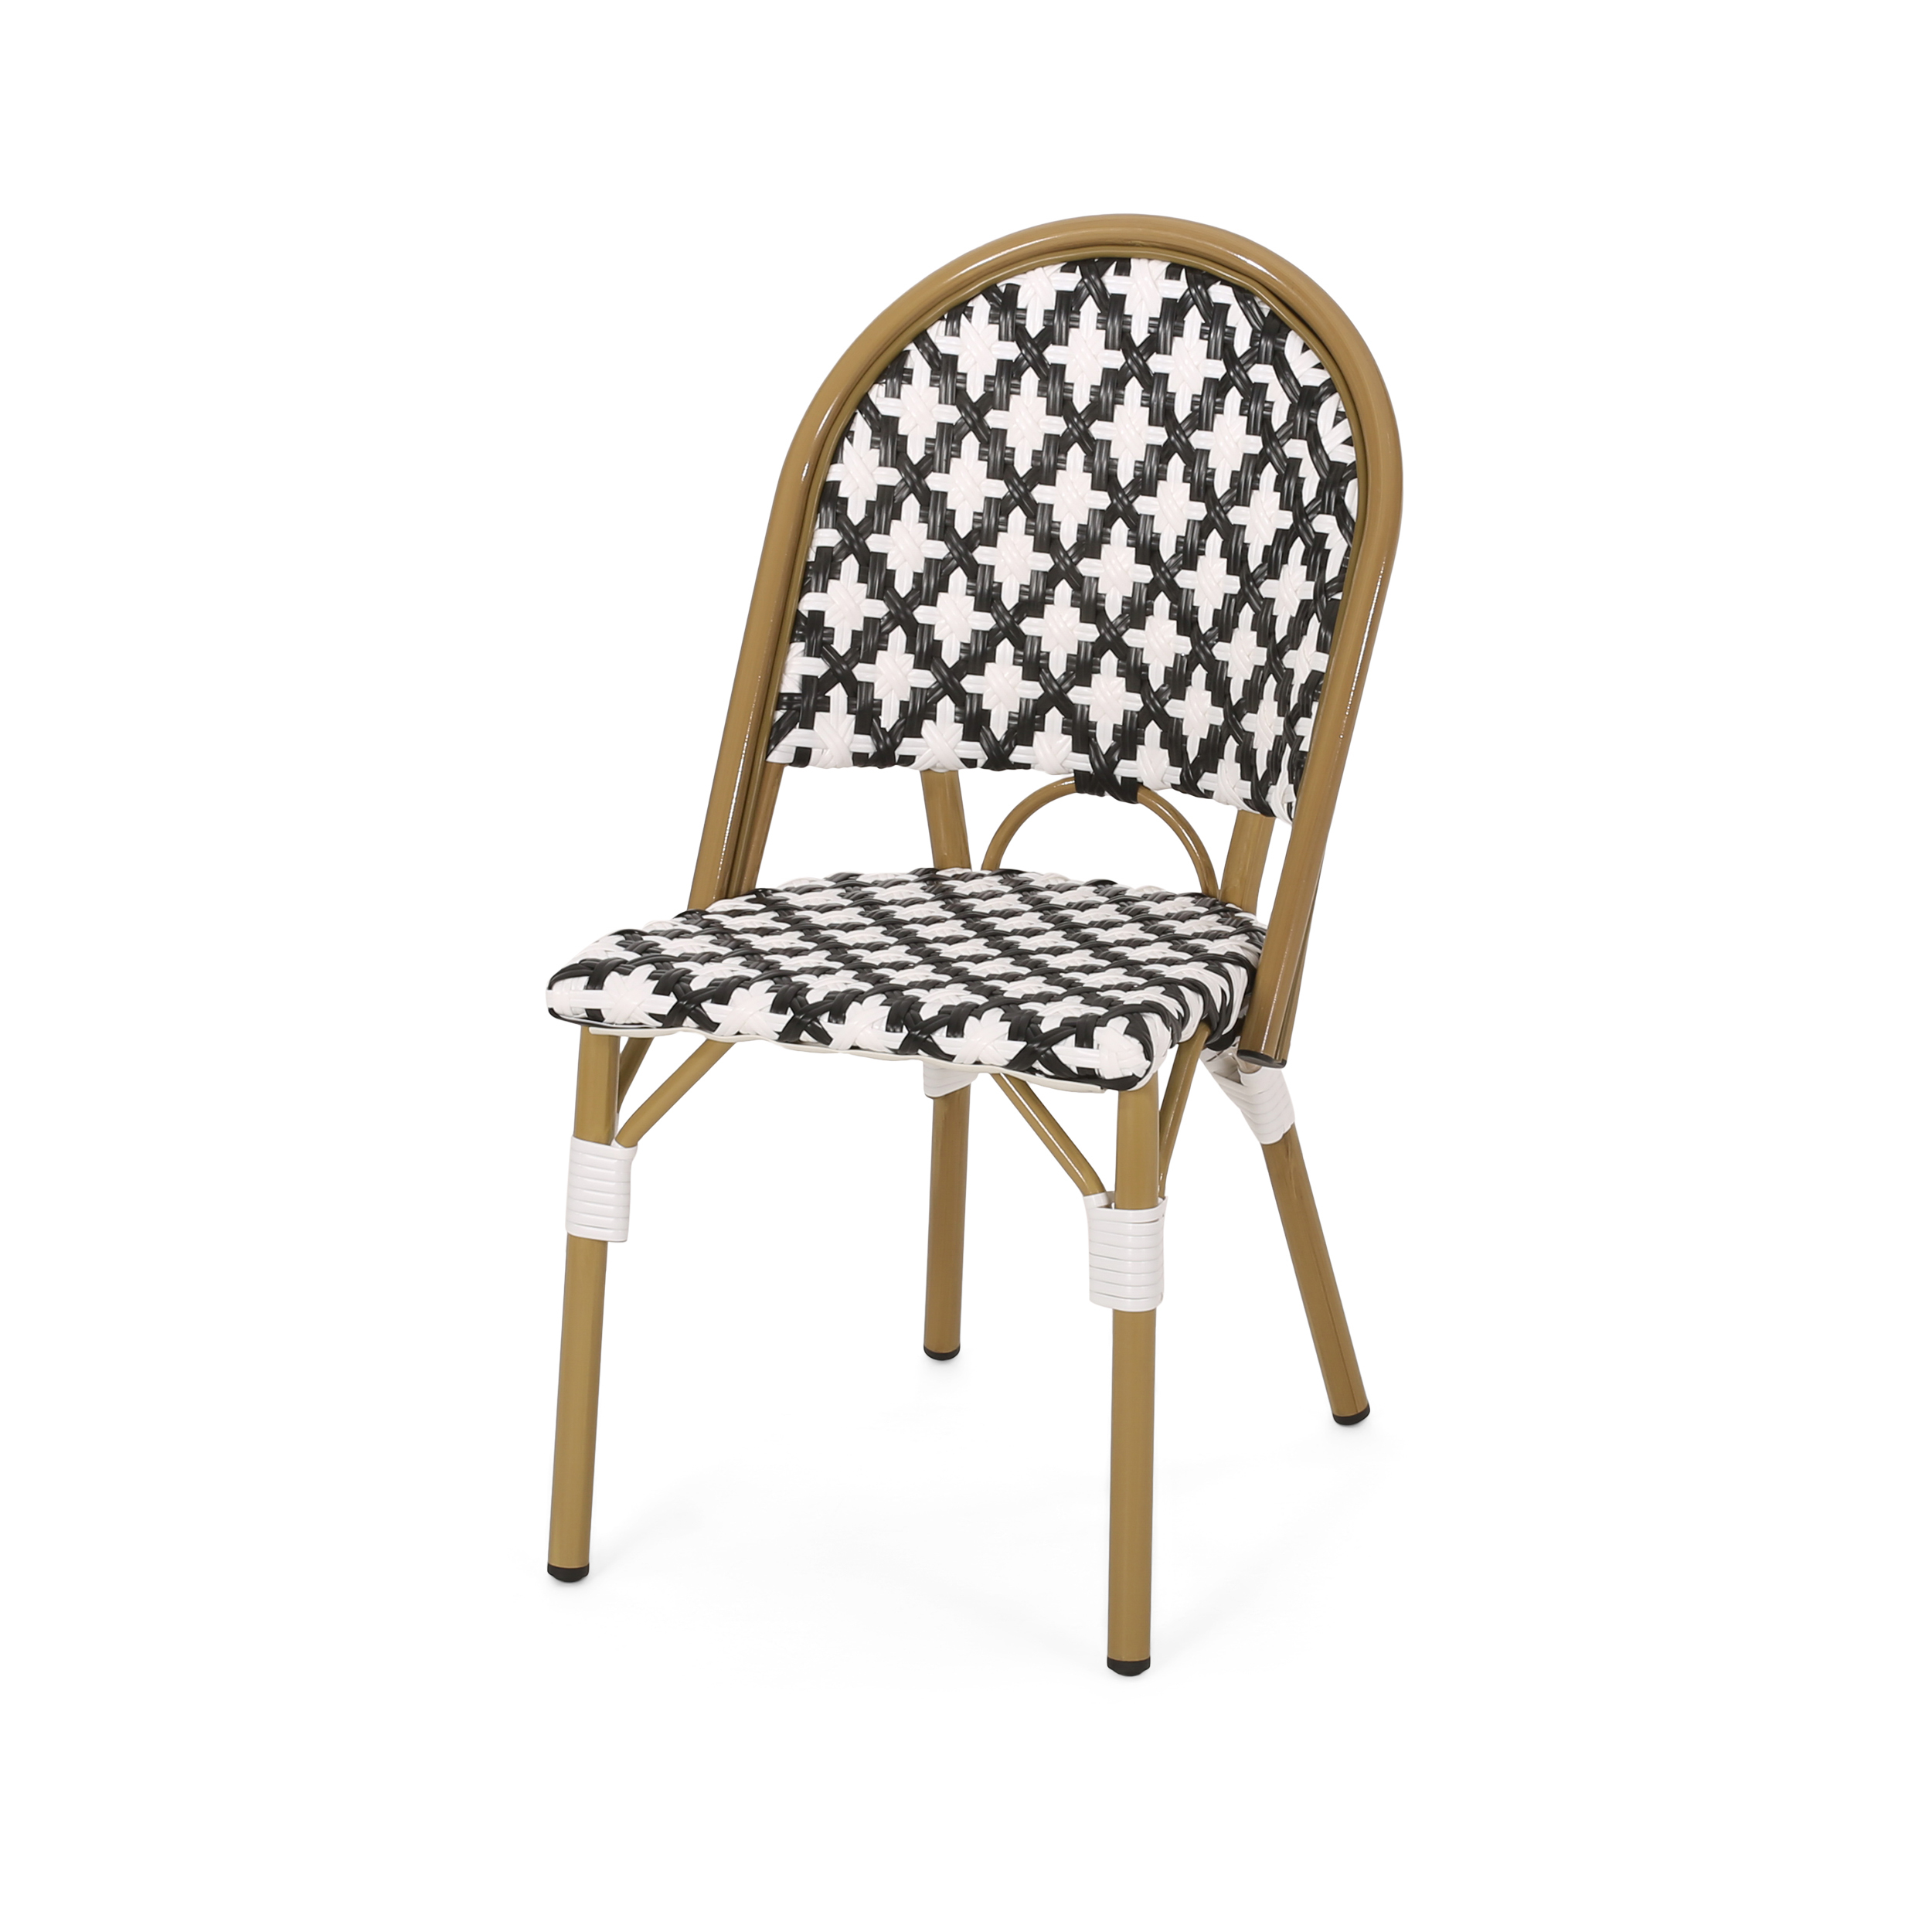 Brandon Outdoor French Bistro Chair, Set of 4, Black, White, Bamboo Finish - image 3 of 8